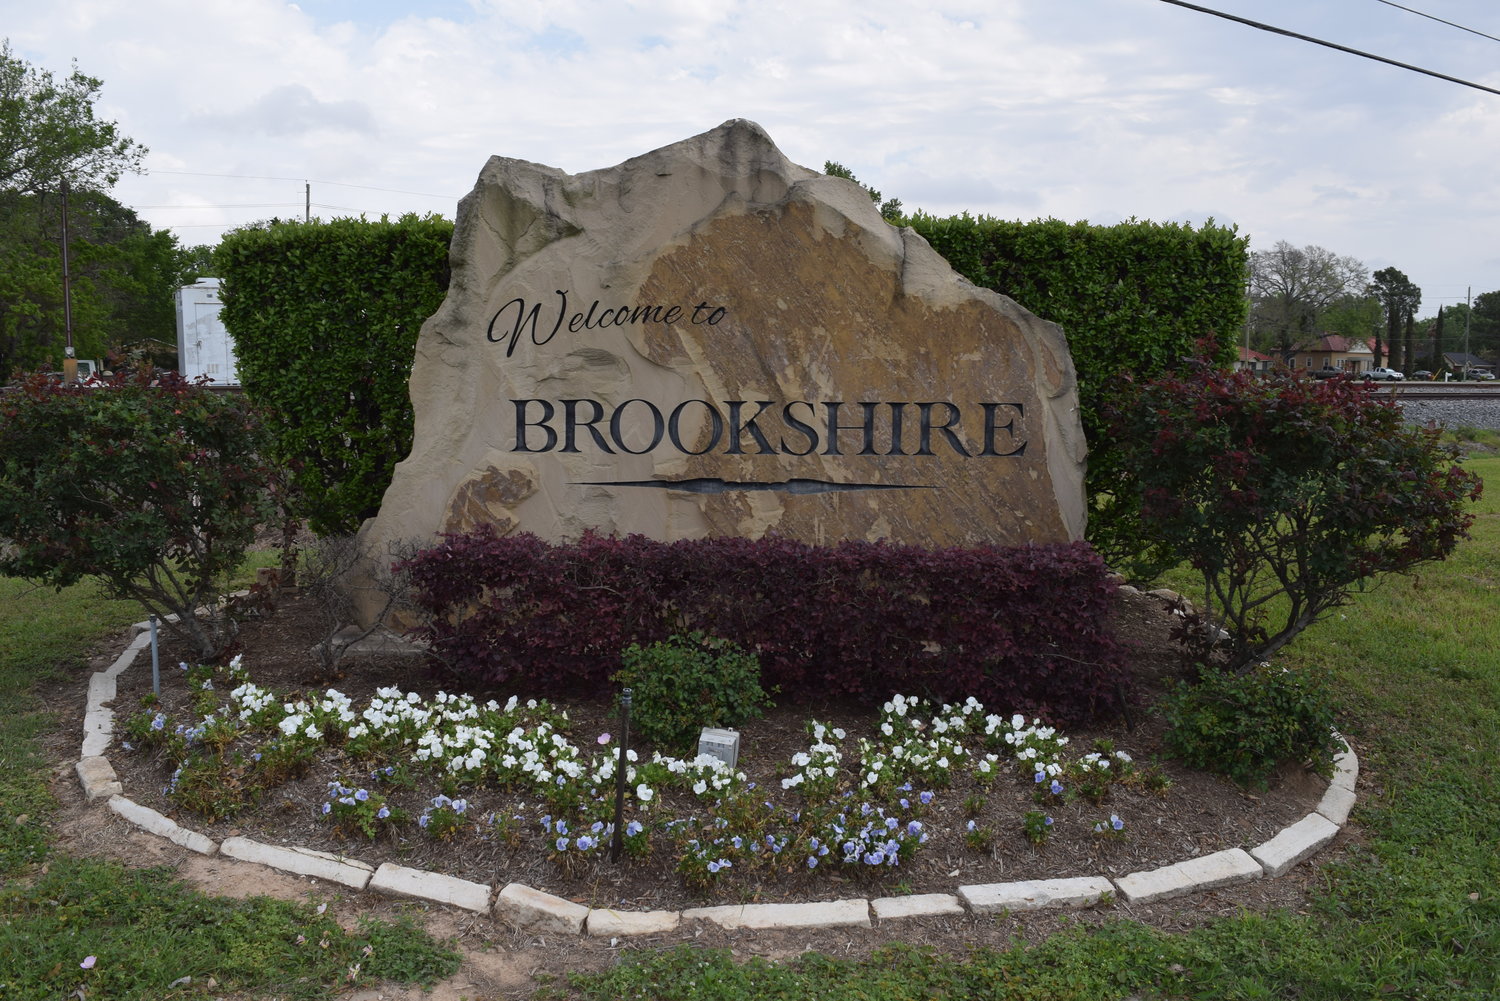 Brookshire City Council approved the results of the May 1 elections this week and swore in a new member of its city council, Alderperson Monique Taylor.